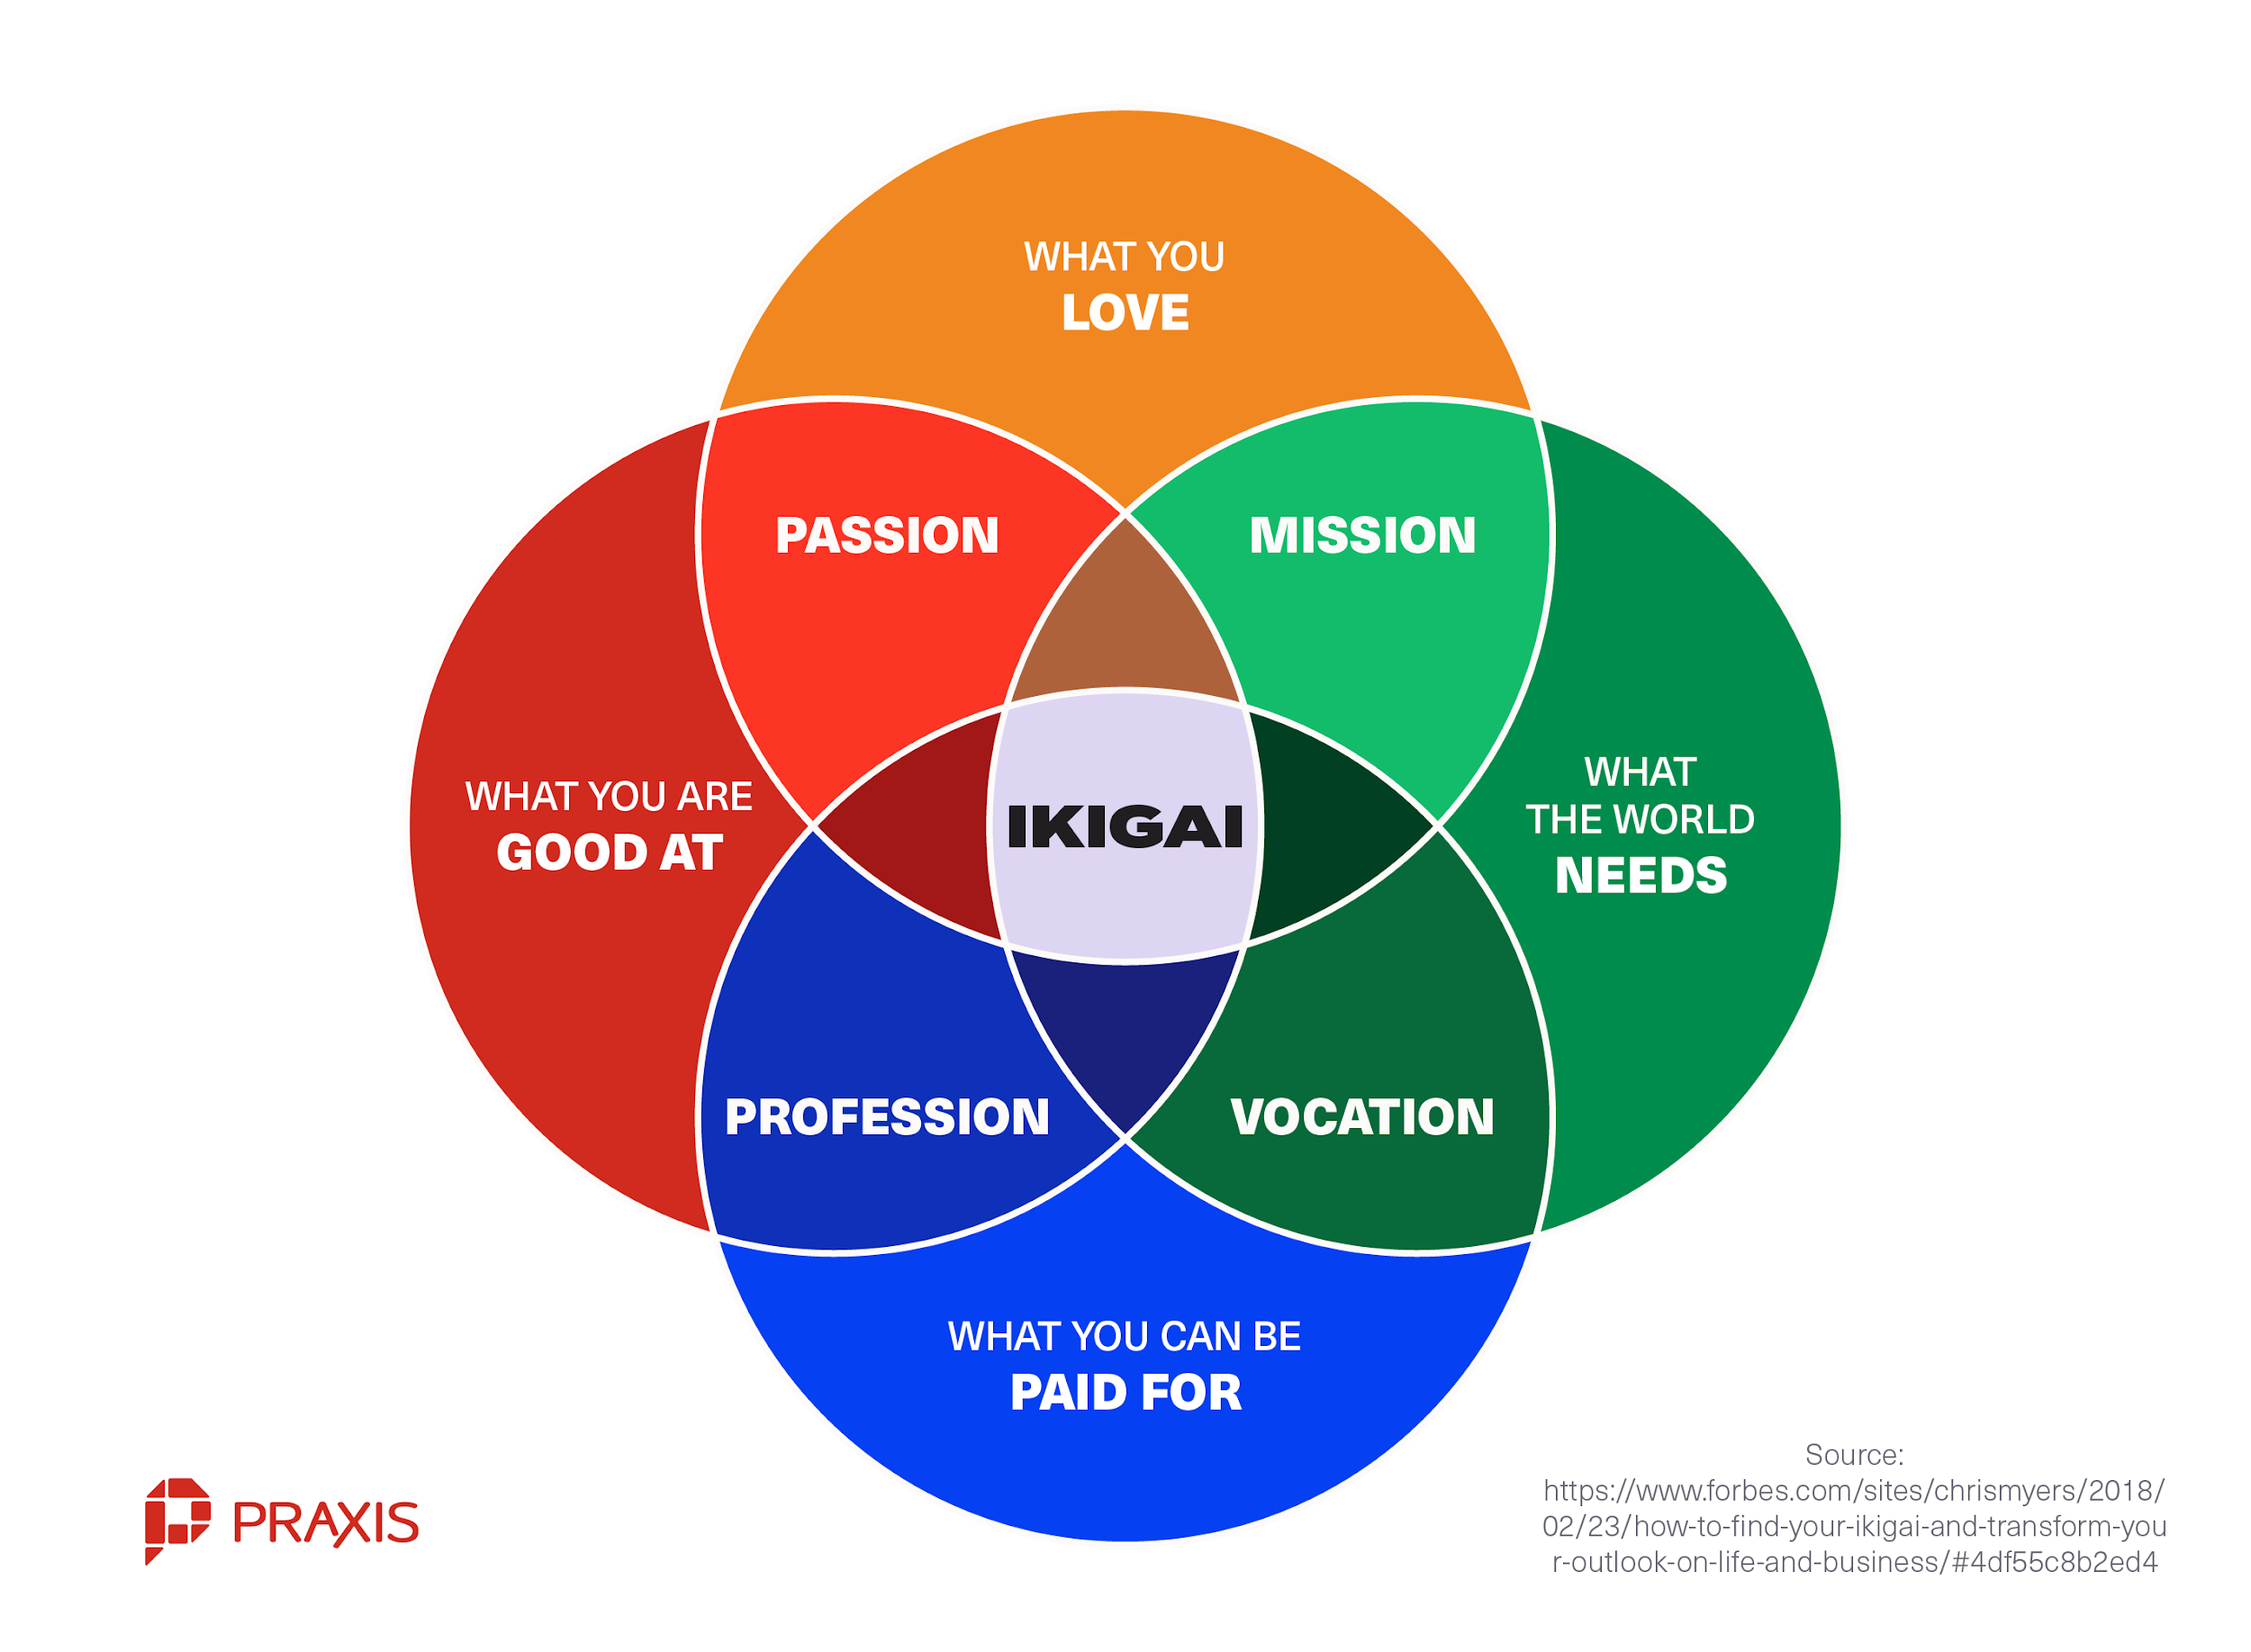 Find Your “Ikigai”